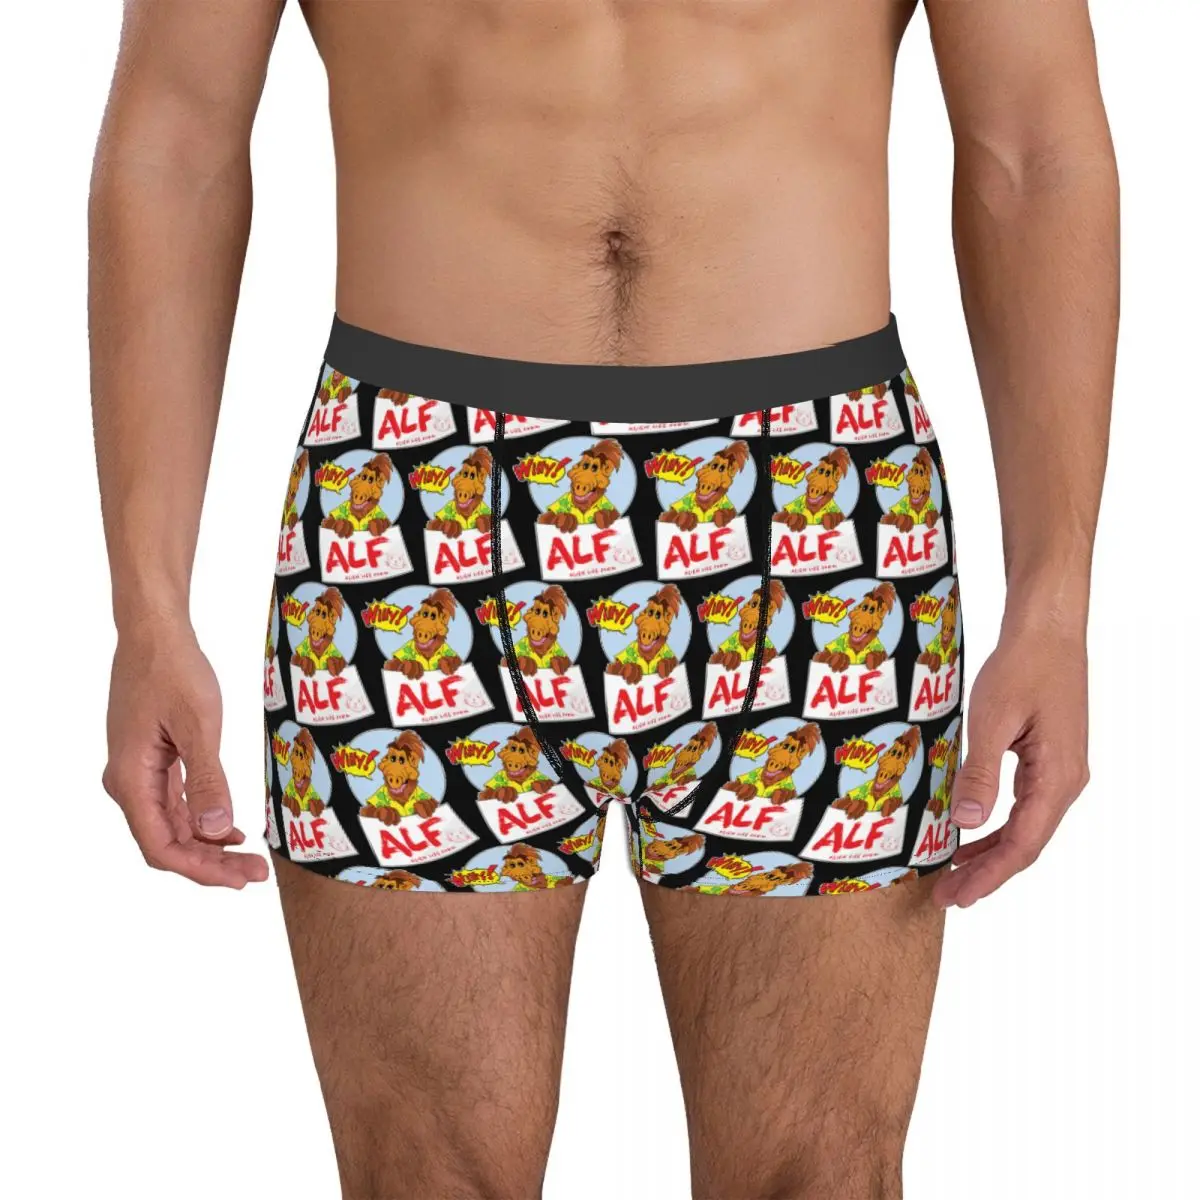 

Sexy Alf Squares Si Fi 5 Men's Boxer Briefs Spring Wearable Graphic Undergarment Funny Novelty